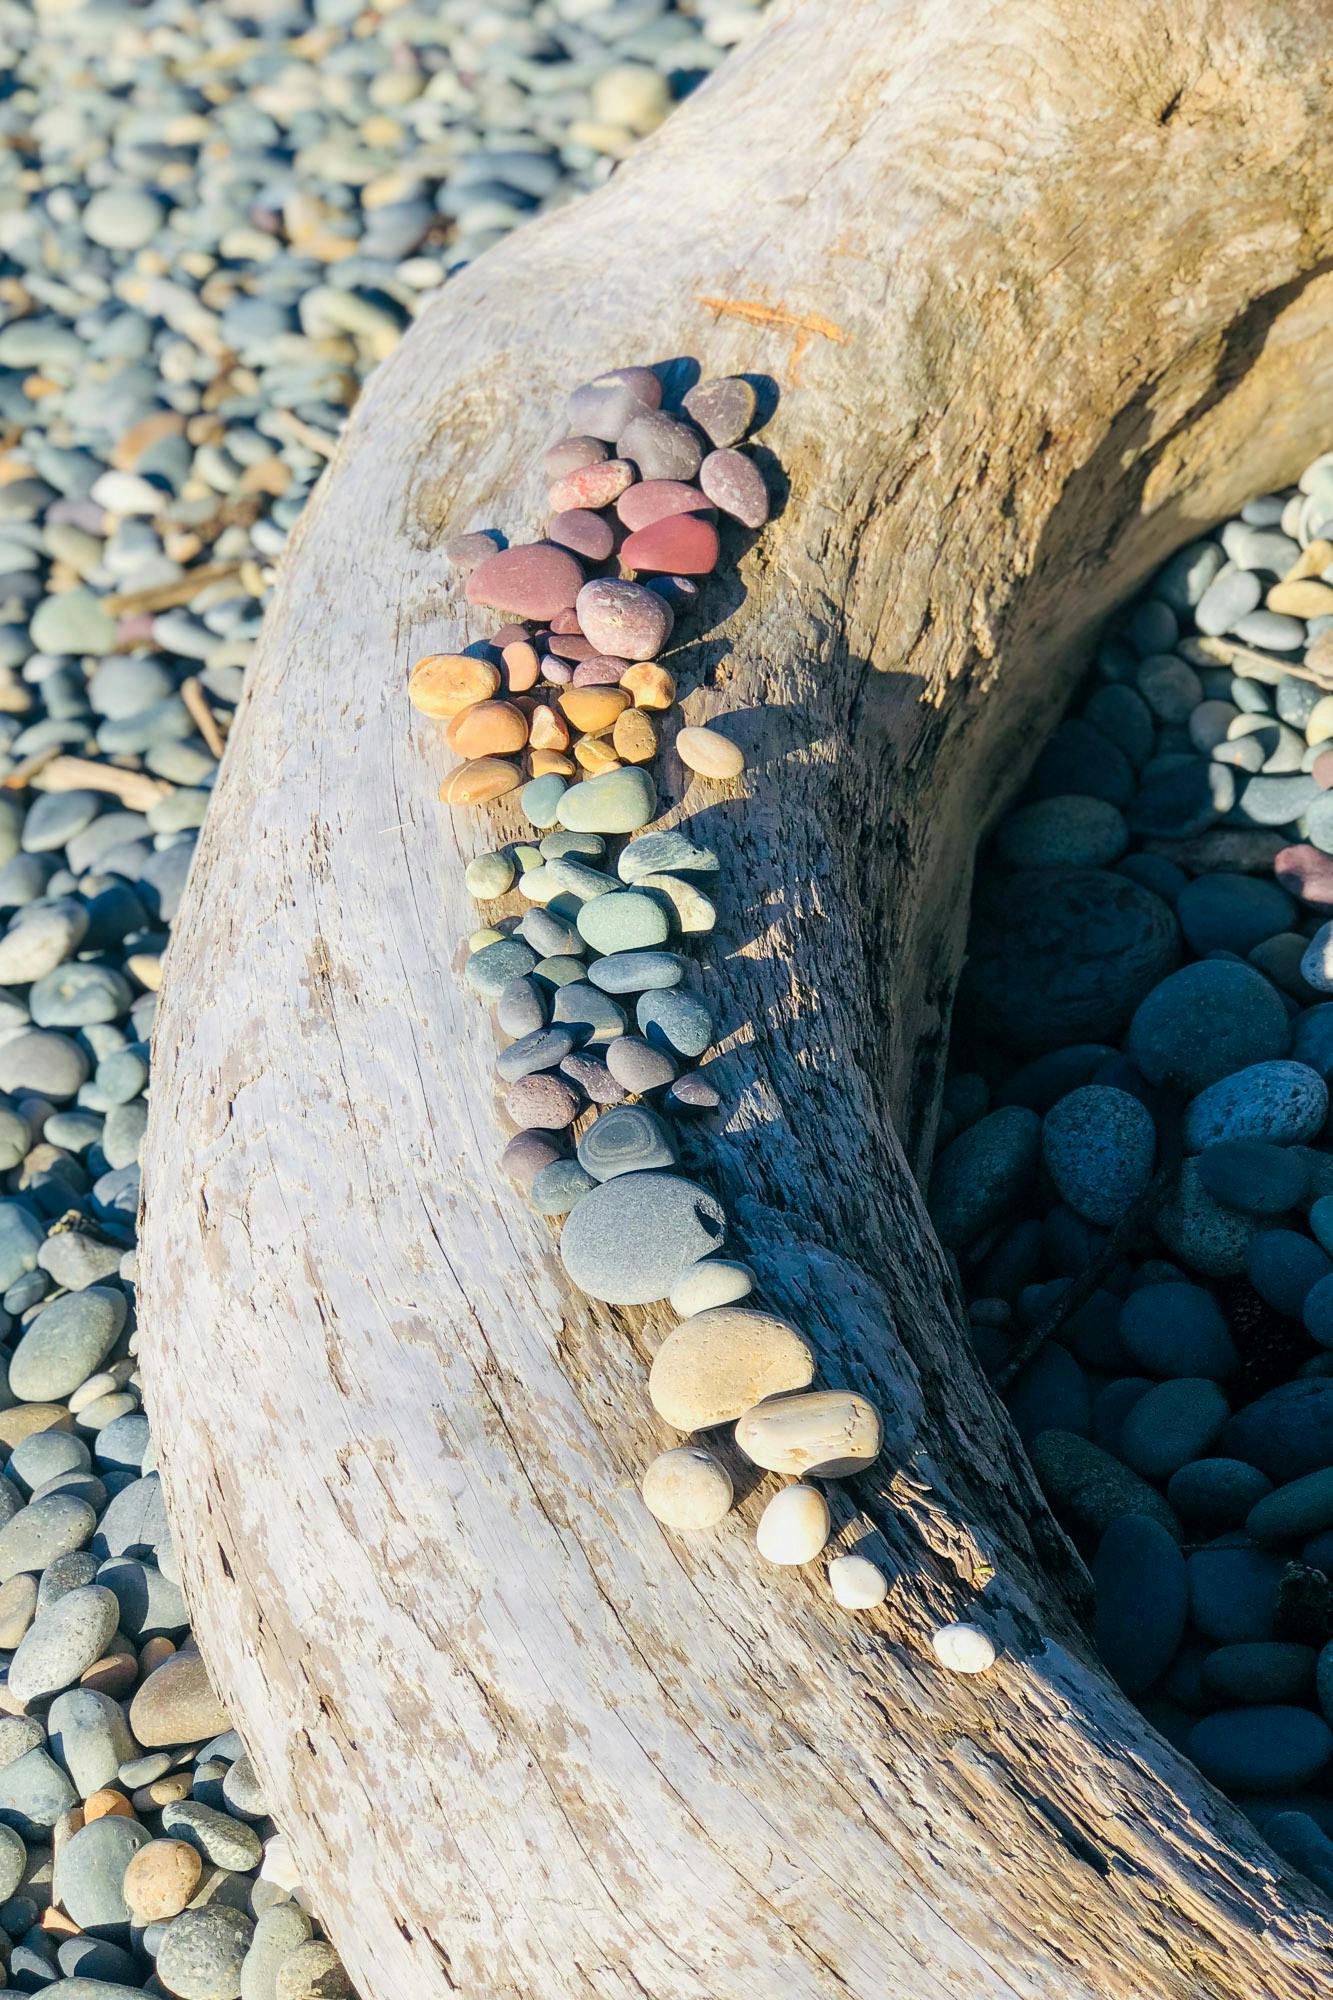 A collection of rocks organized in a rainbow.